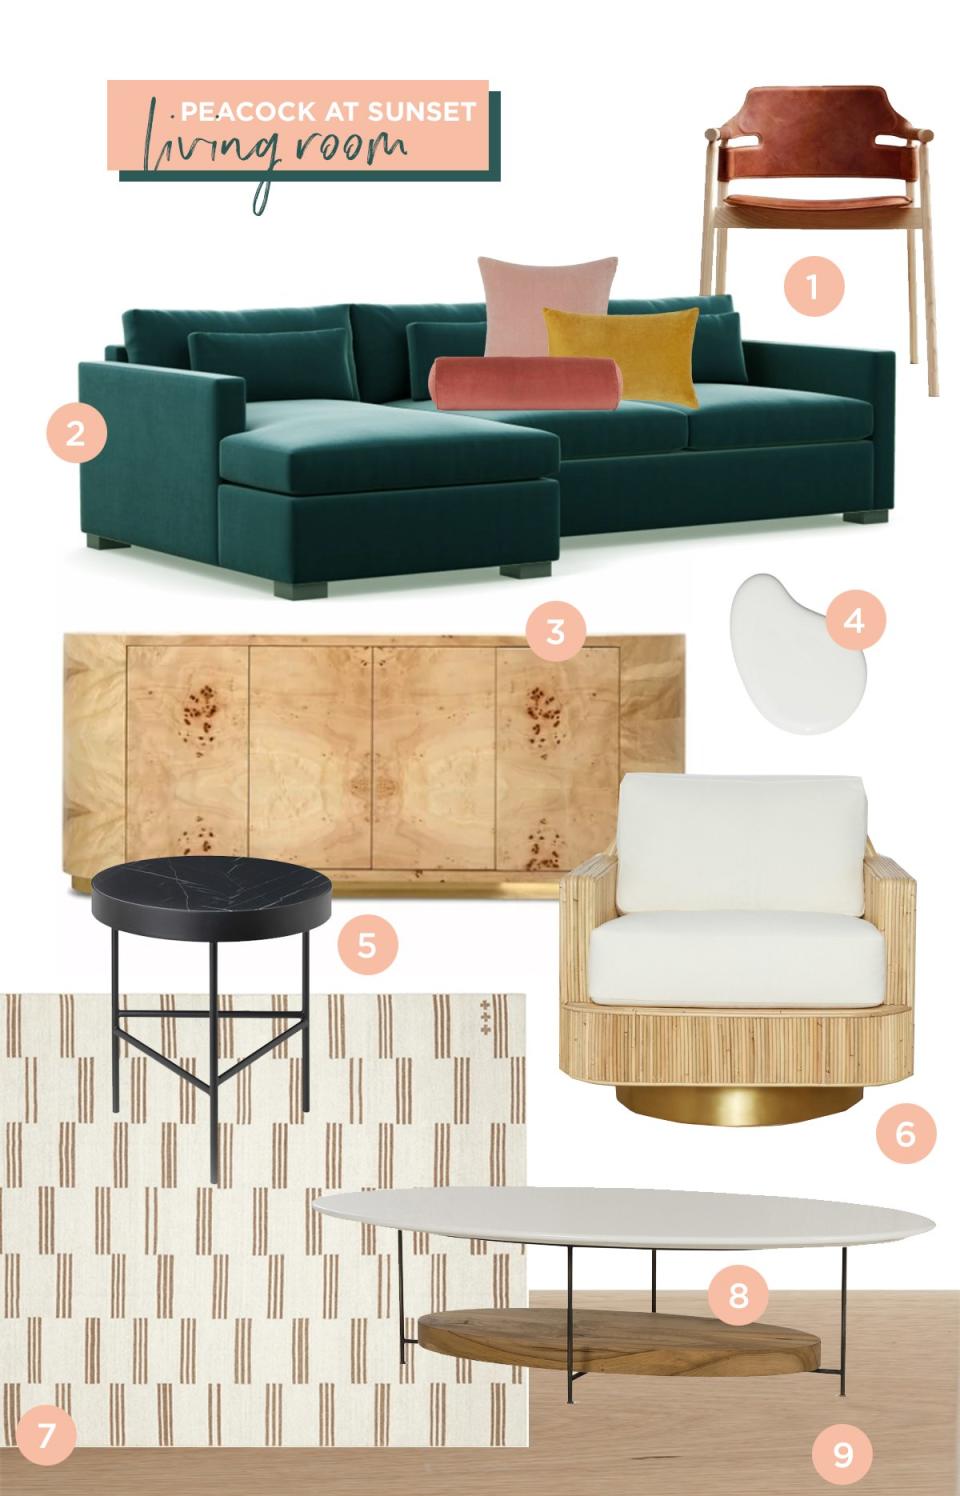 Shown: 1. Perigold desk chair, 2. Interior Define Charley Sleeper Sectional in Malachite velvet with Lulu and Georgia Sunset Pillows, 3. Modshop credenza, 4. Clare Classic paint, 5. Lulu and Georgia side table, 6. Justina Blakeney chair, 7. Sarah Sherman Samuel for Lulu and Georgia rug, 8. Lulu and Georgiacoffee table, 9. Mohawk wood floors in Beachwood Oak.